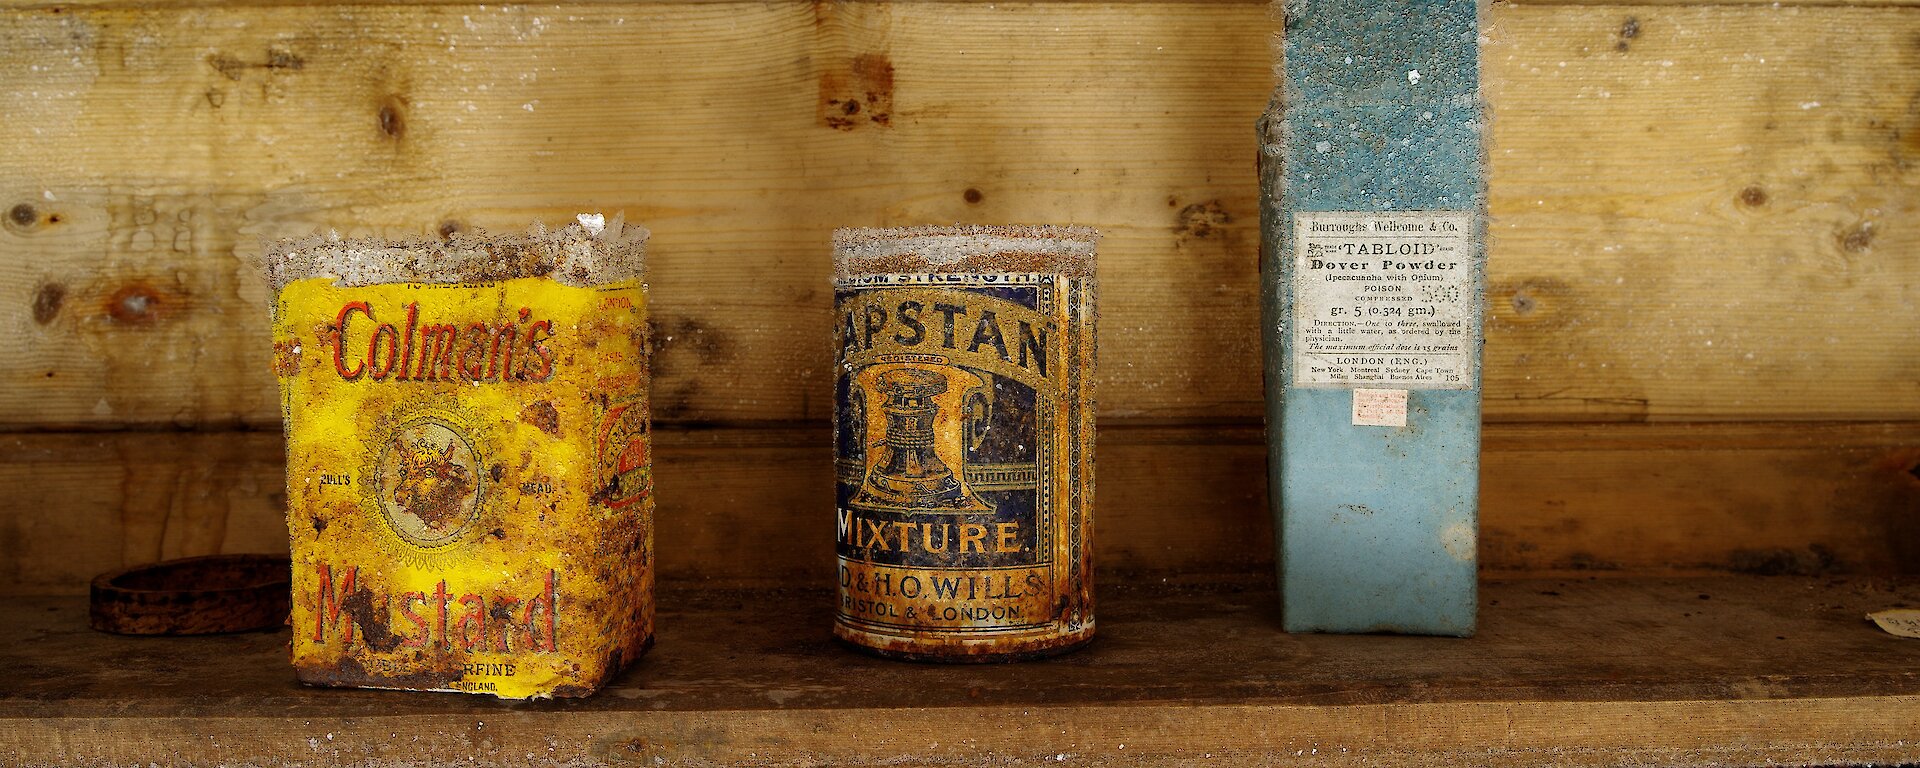 A row of tins on a shelf, covered in ice crystals.